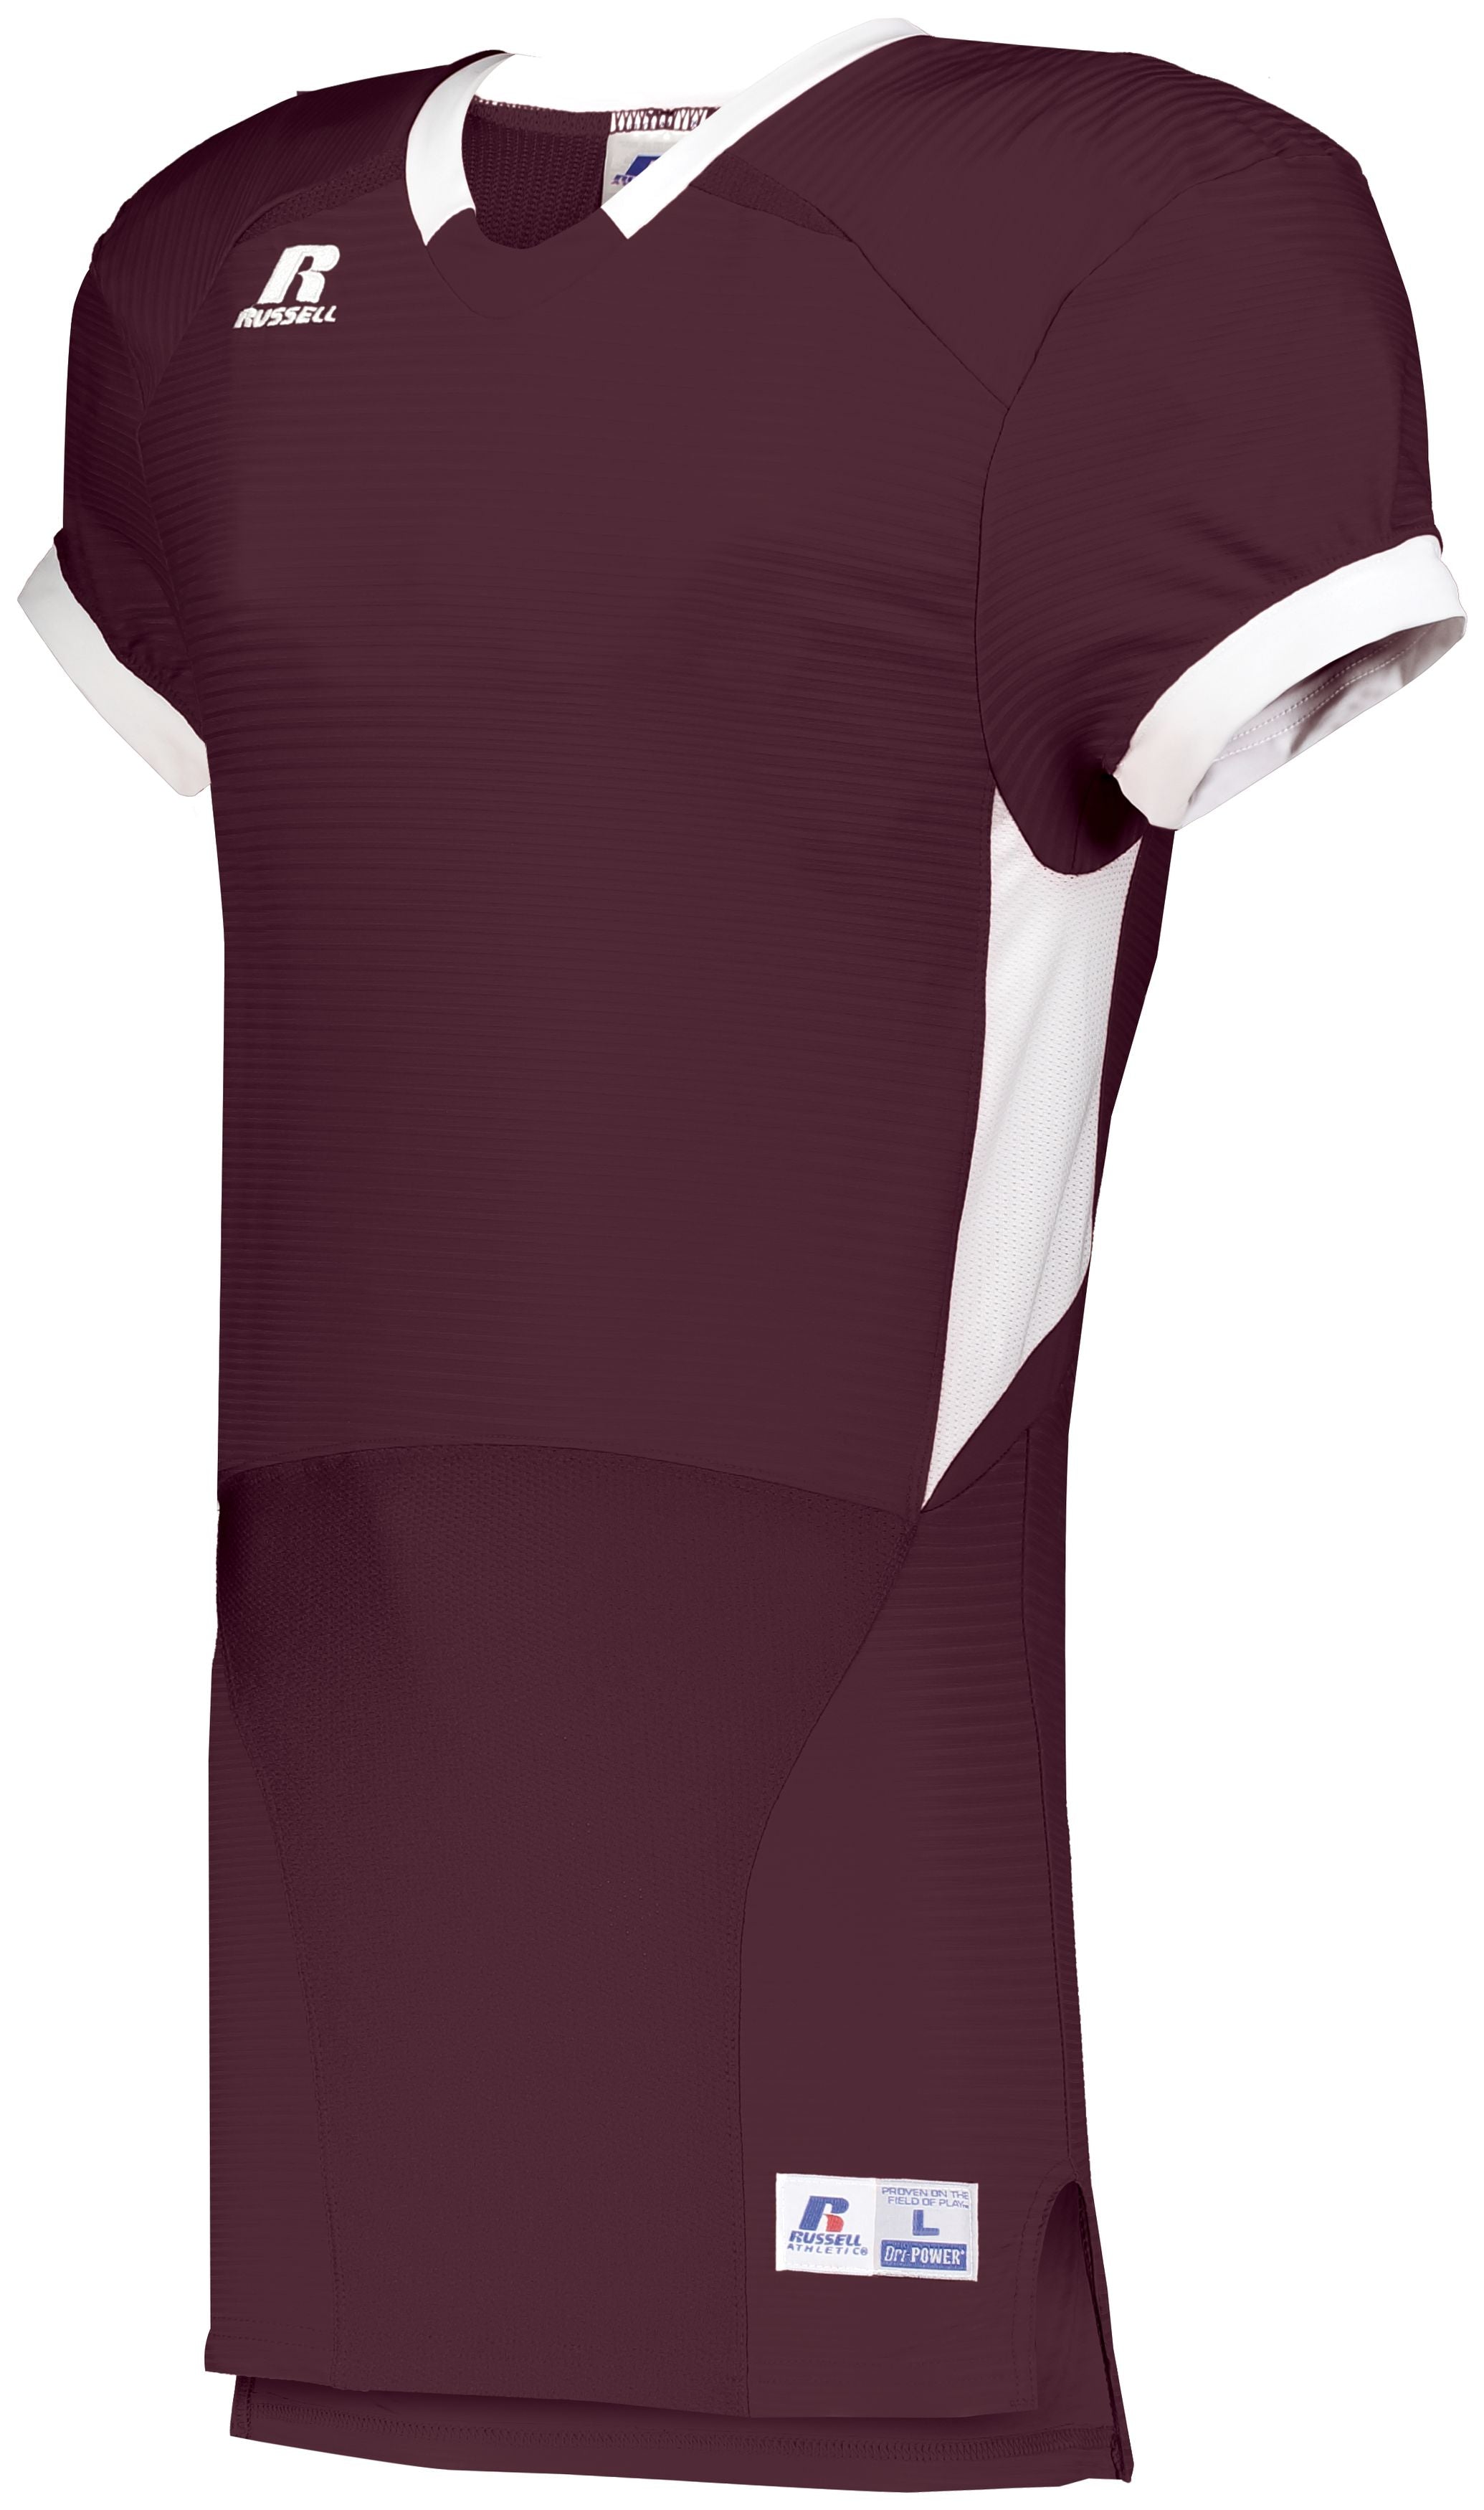 Russell Athletic Color Block Game Jersey in Maroon/White  -Part of the Adult, Adult-Jersey, Football, Russell-Athletic-Products, Shirts, All-Sports, All-Sports-1 product lines at KanaleyCreations.com